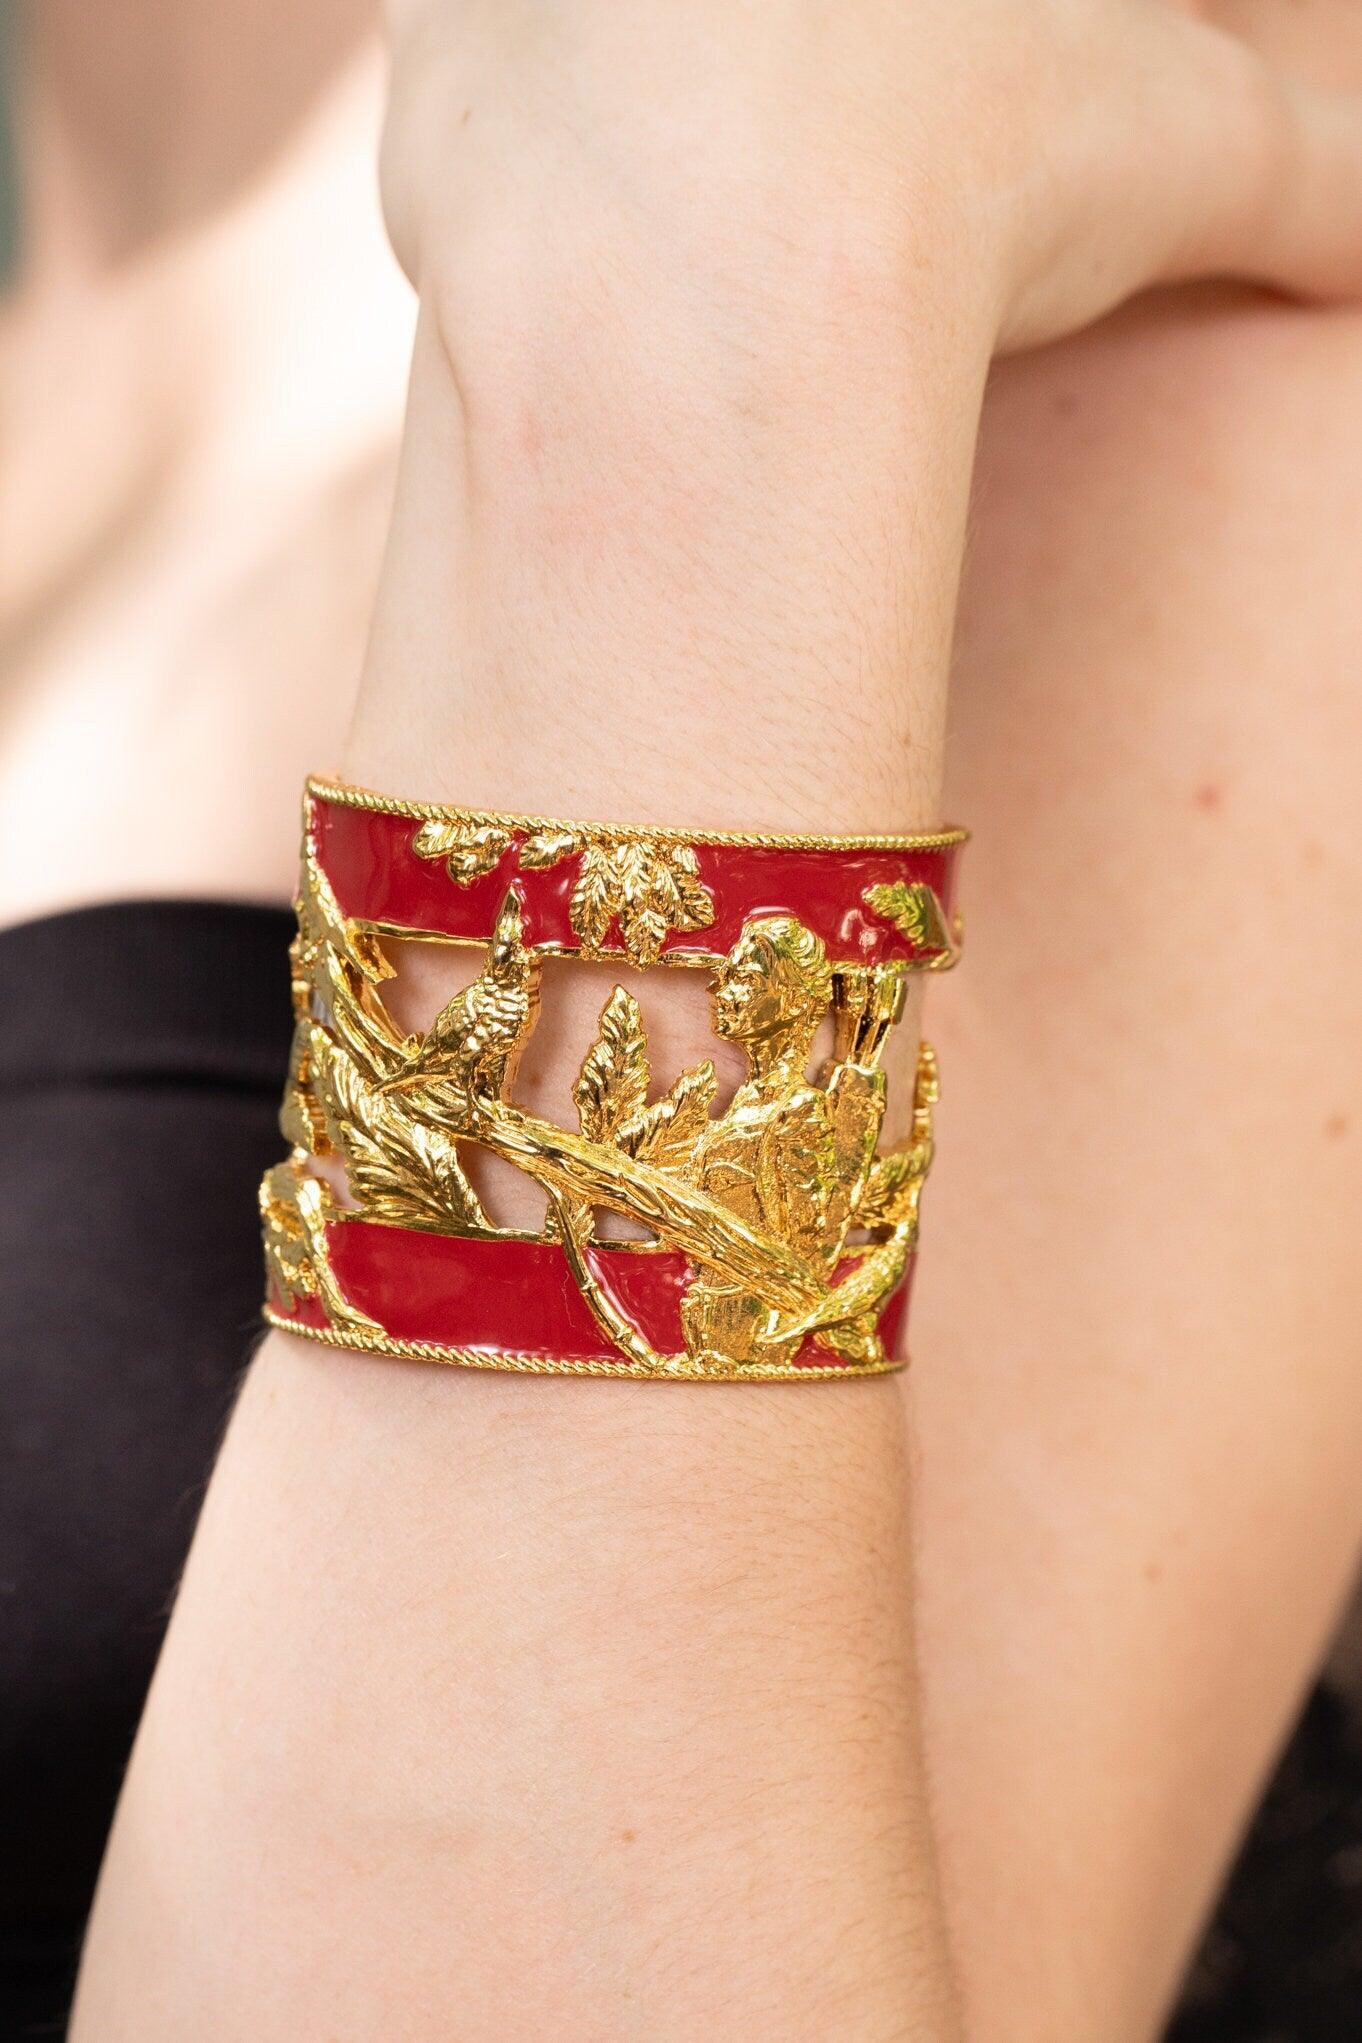 Unique Cuff Bracelet "Vigor" - Gold & Red Gift, Gift For Mom, Artistic, Jewelry Cuff, Bracelet, Gold, Silver, Brass